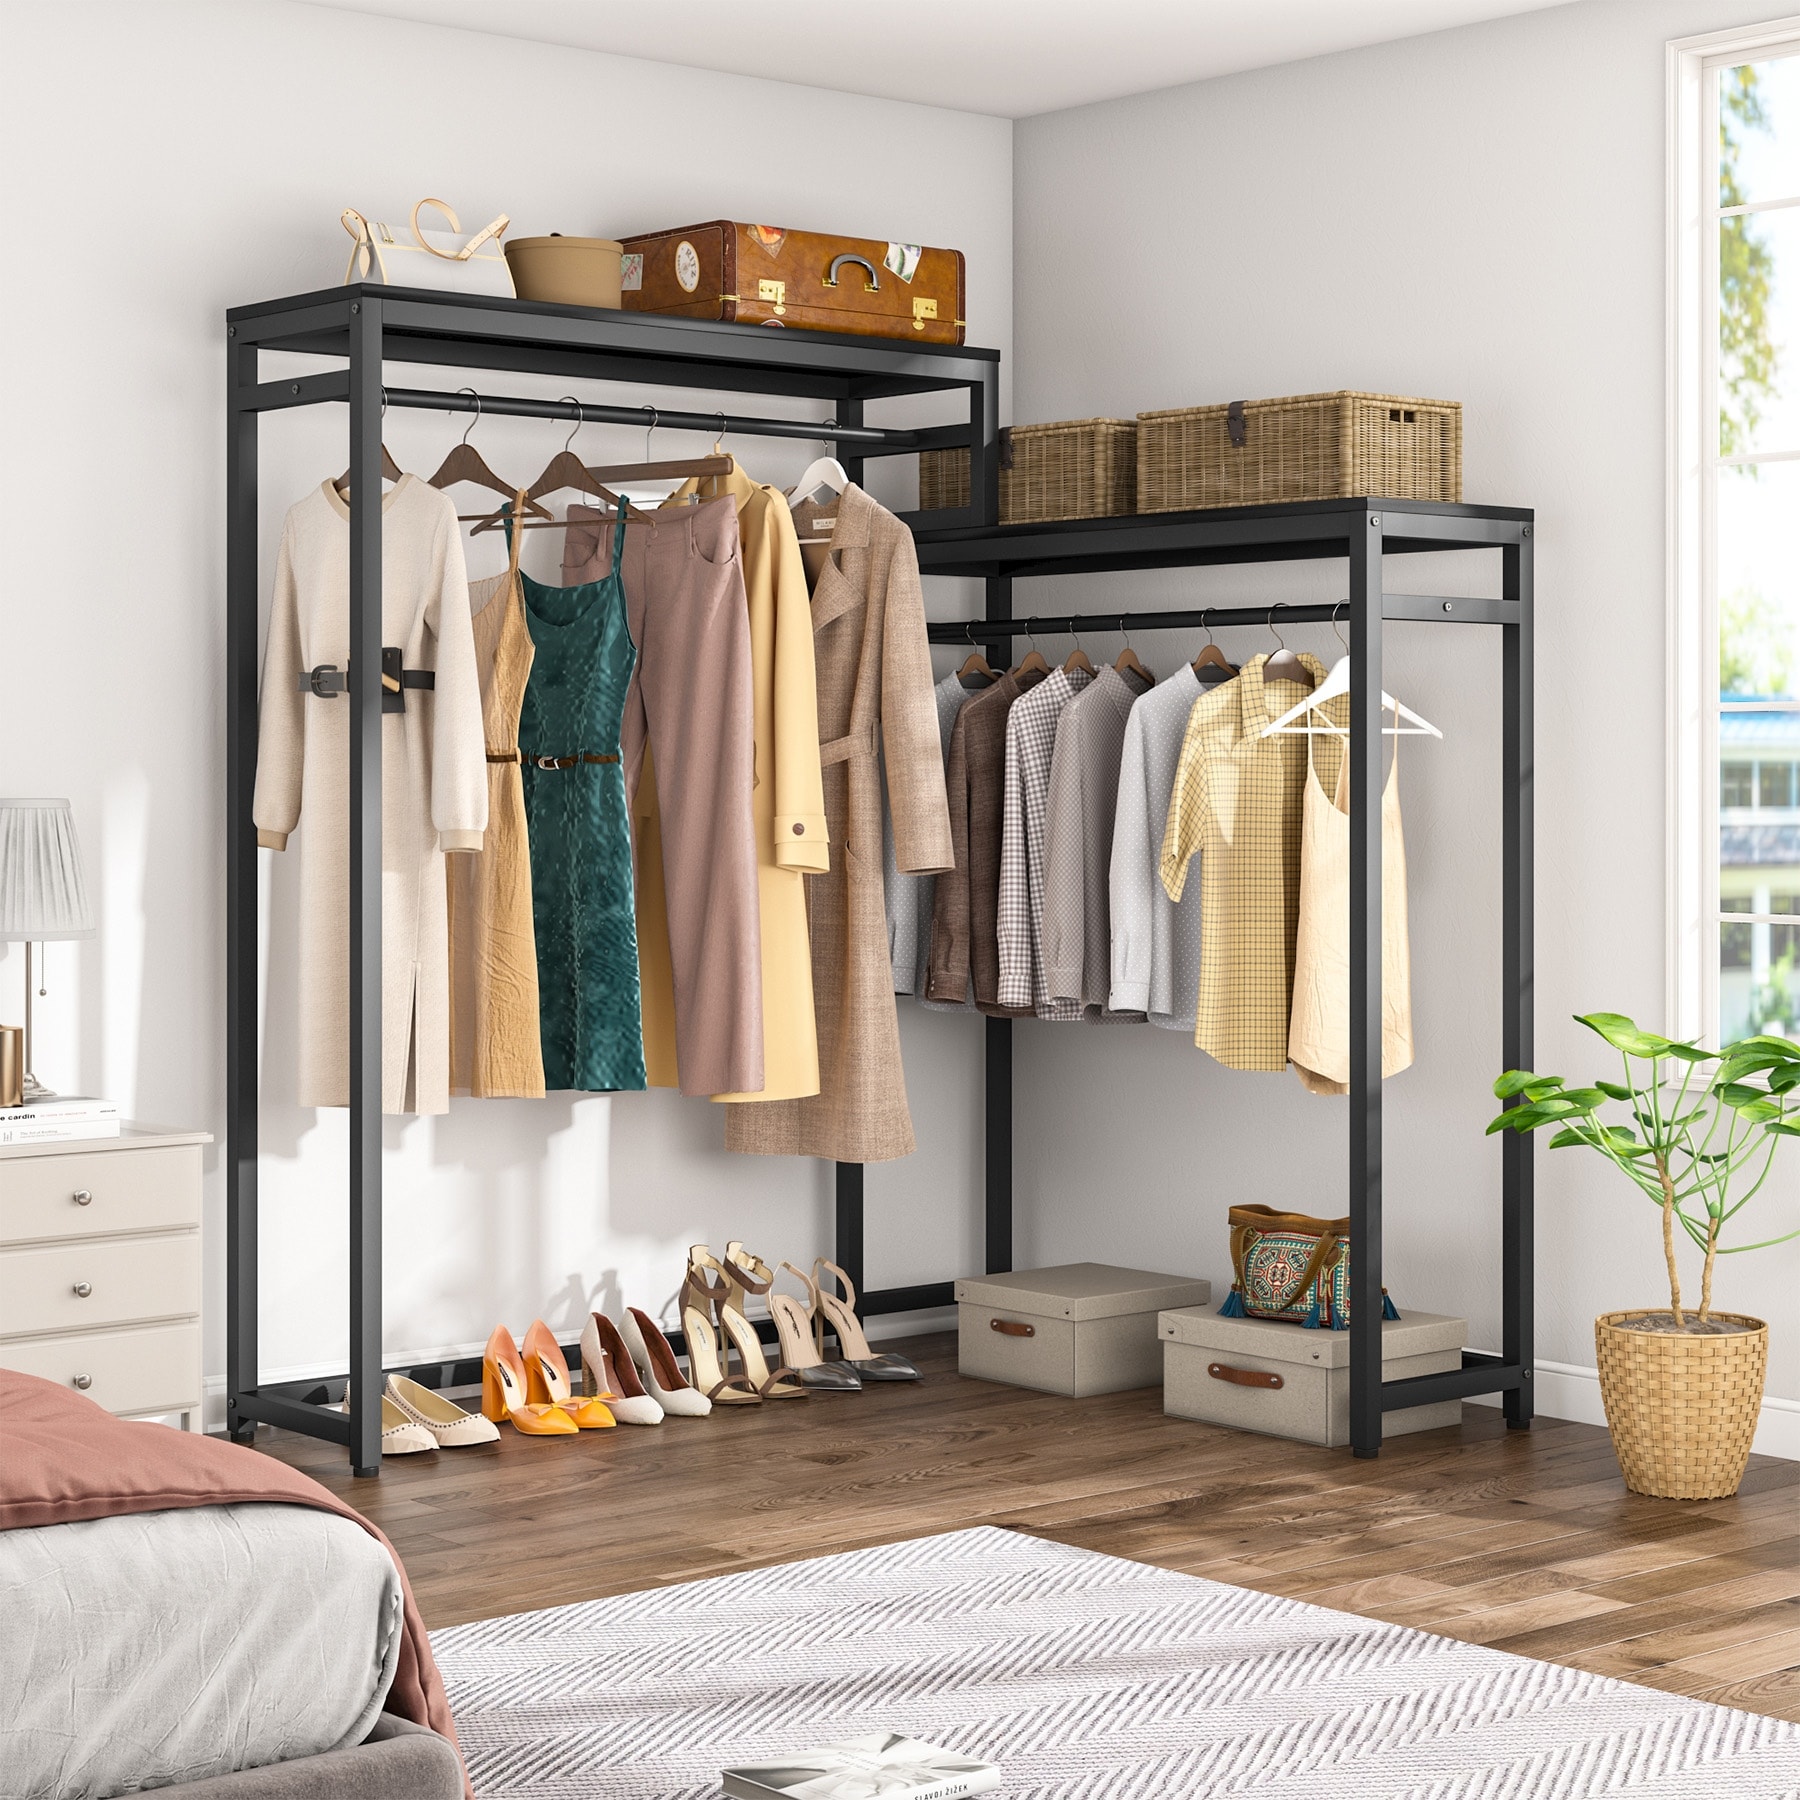 https://ak1.ostkcdn.com/images/products/is/images/direct/7390b6105a2a3ead154c55c615c353aa972341c8/Tribesigns-Free-Standing-Closet-Organizer%2C-Clothes-Garment-Racks-with-Storage-Shelves-and-Double-Hanging-Rod.jpg